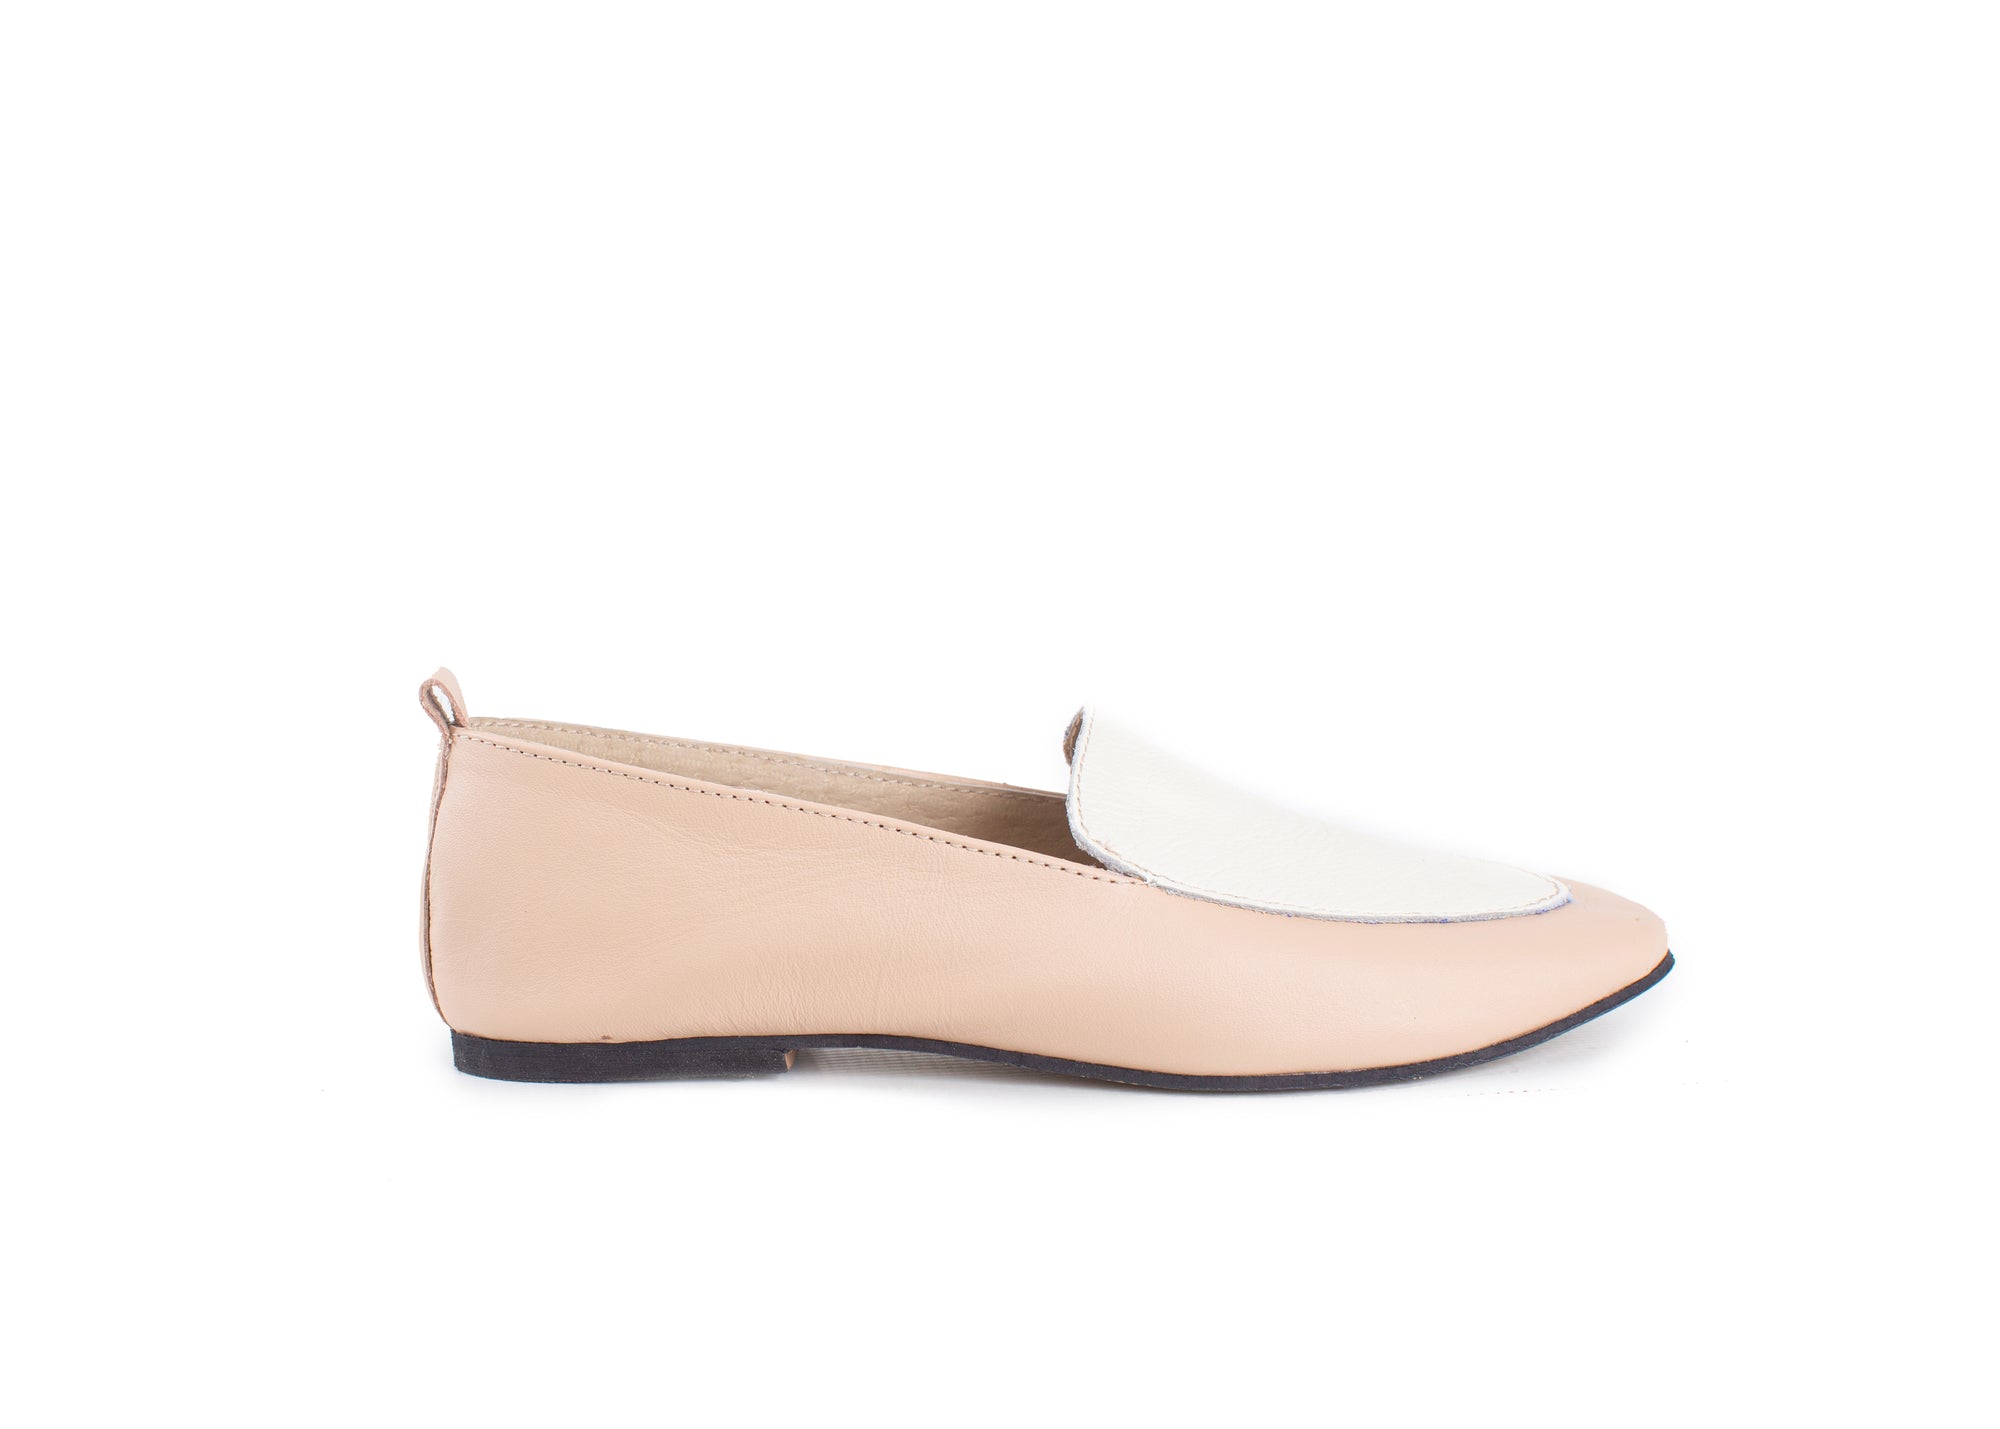 Classic loafer - cream with ballet nude leather